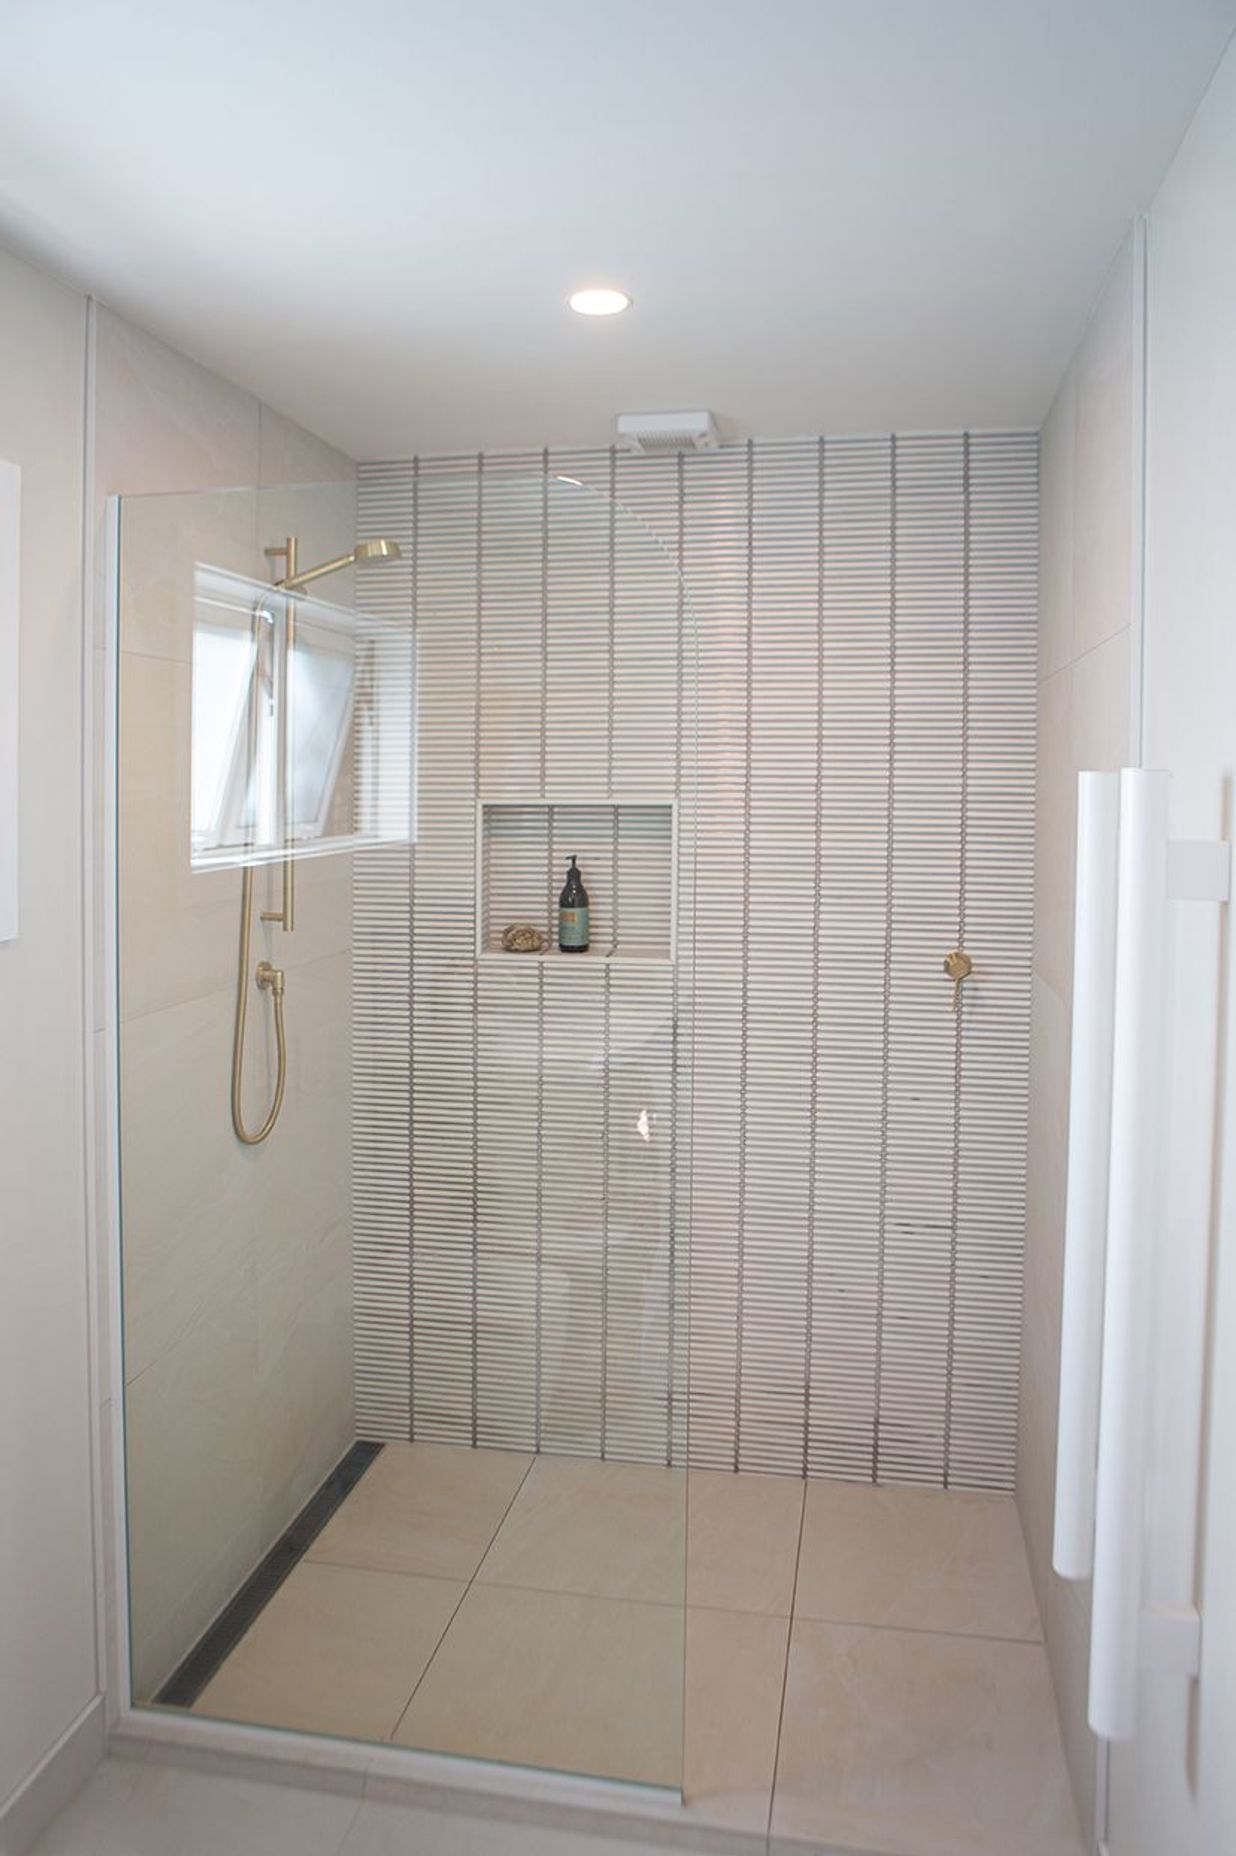 Generous shower with brass slide shower, recessed niche and a simple fixed glass pane.